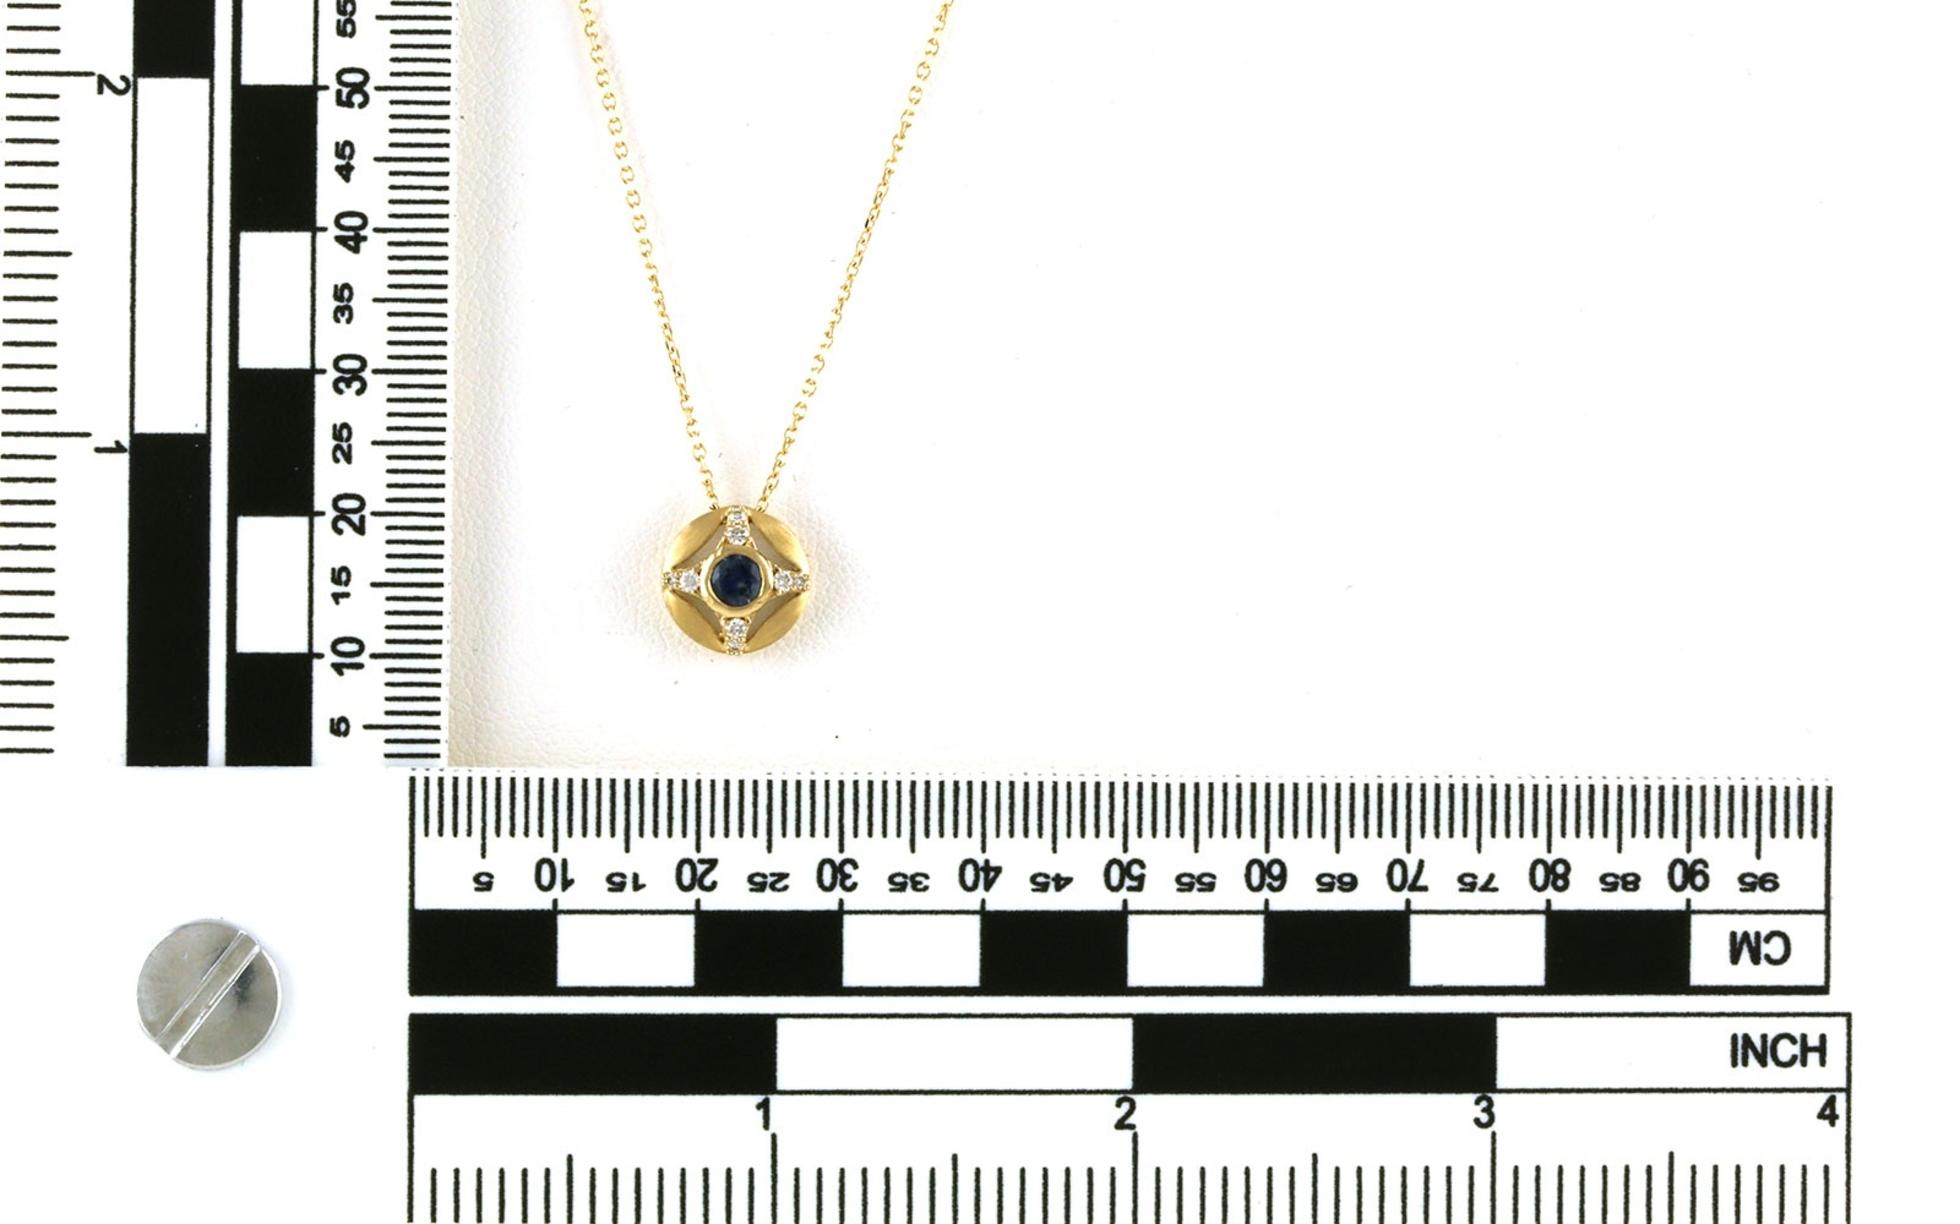 4-Point Star Bezel-set Montana Sapphire and Diamond Necklace with Satin Finish in Yellow Gold (0.38cts TWT) scale